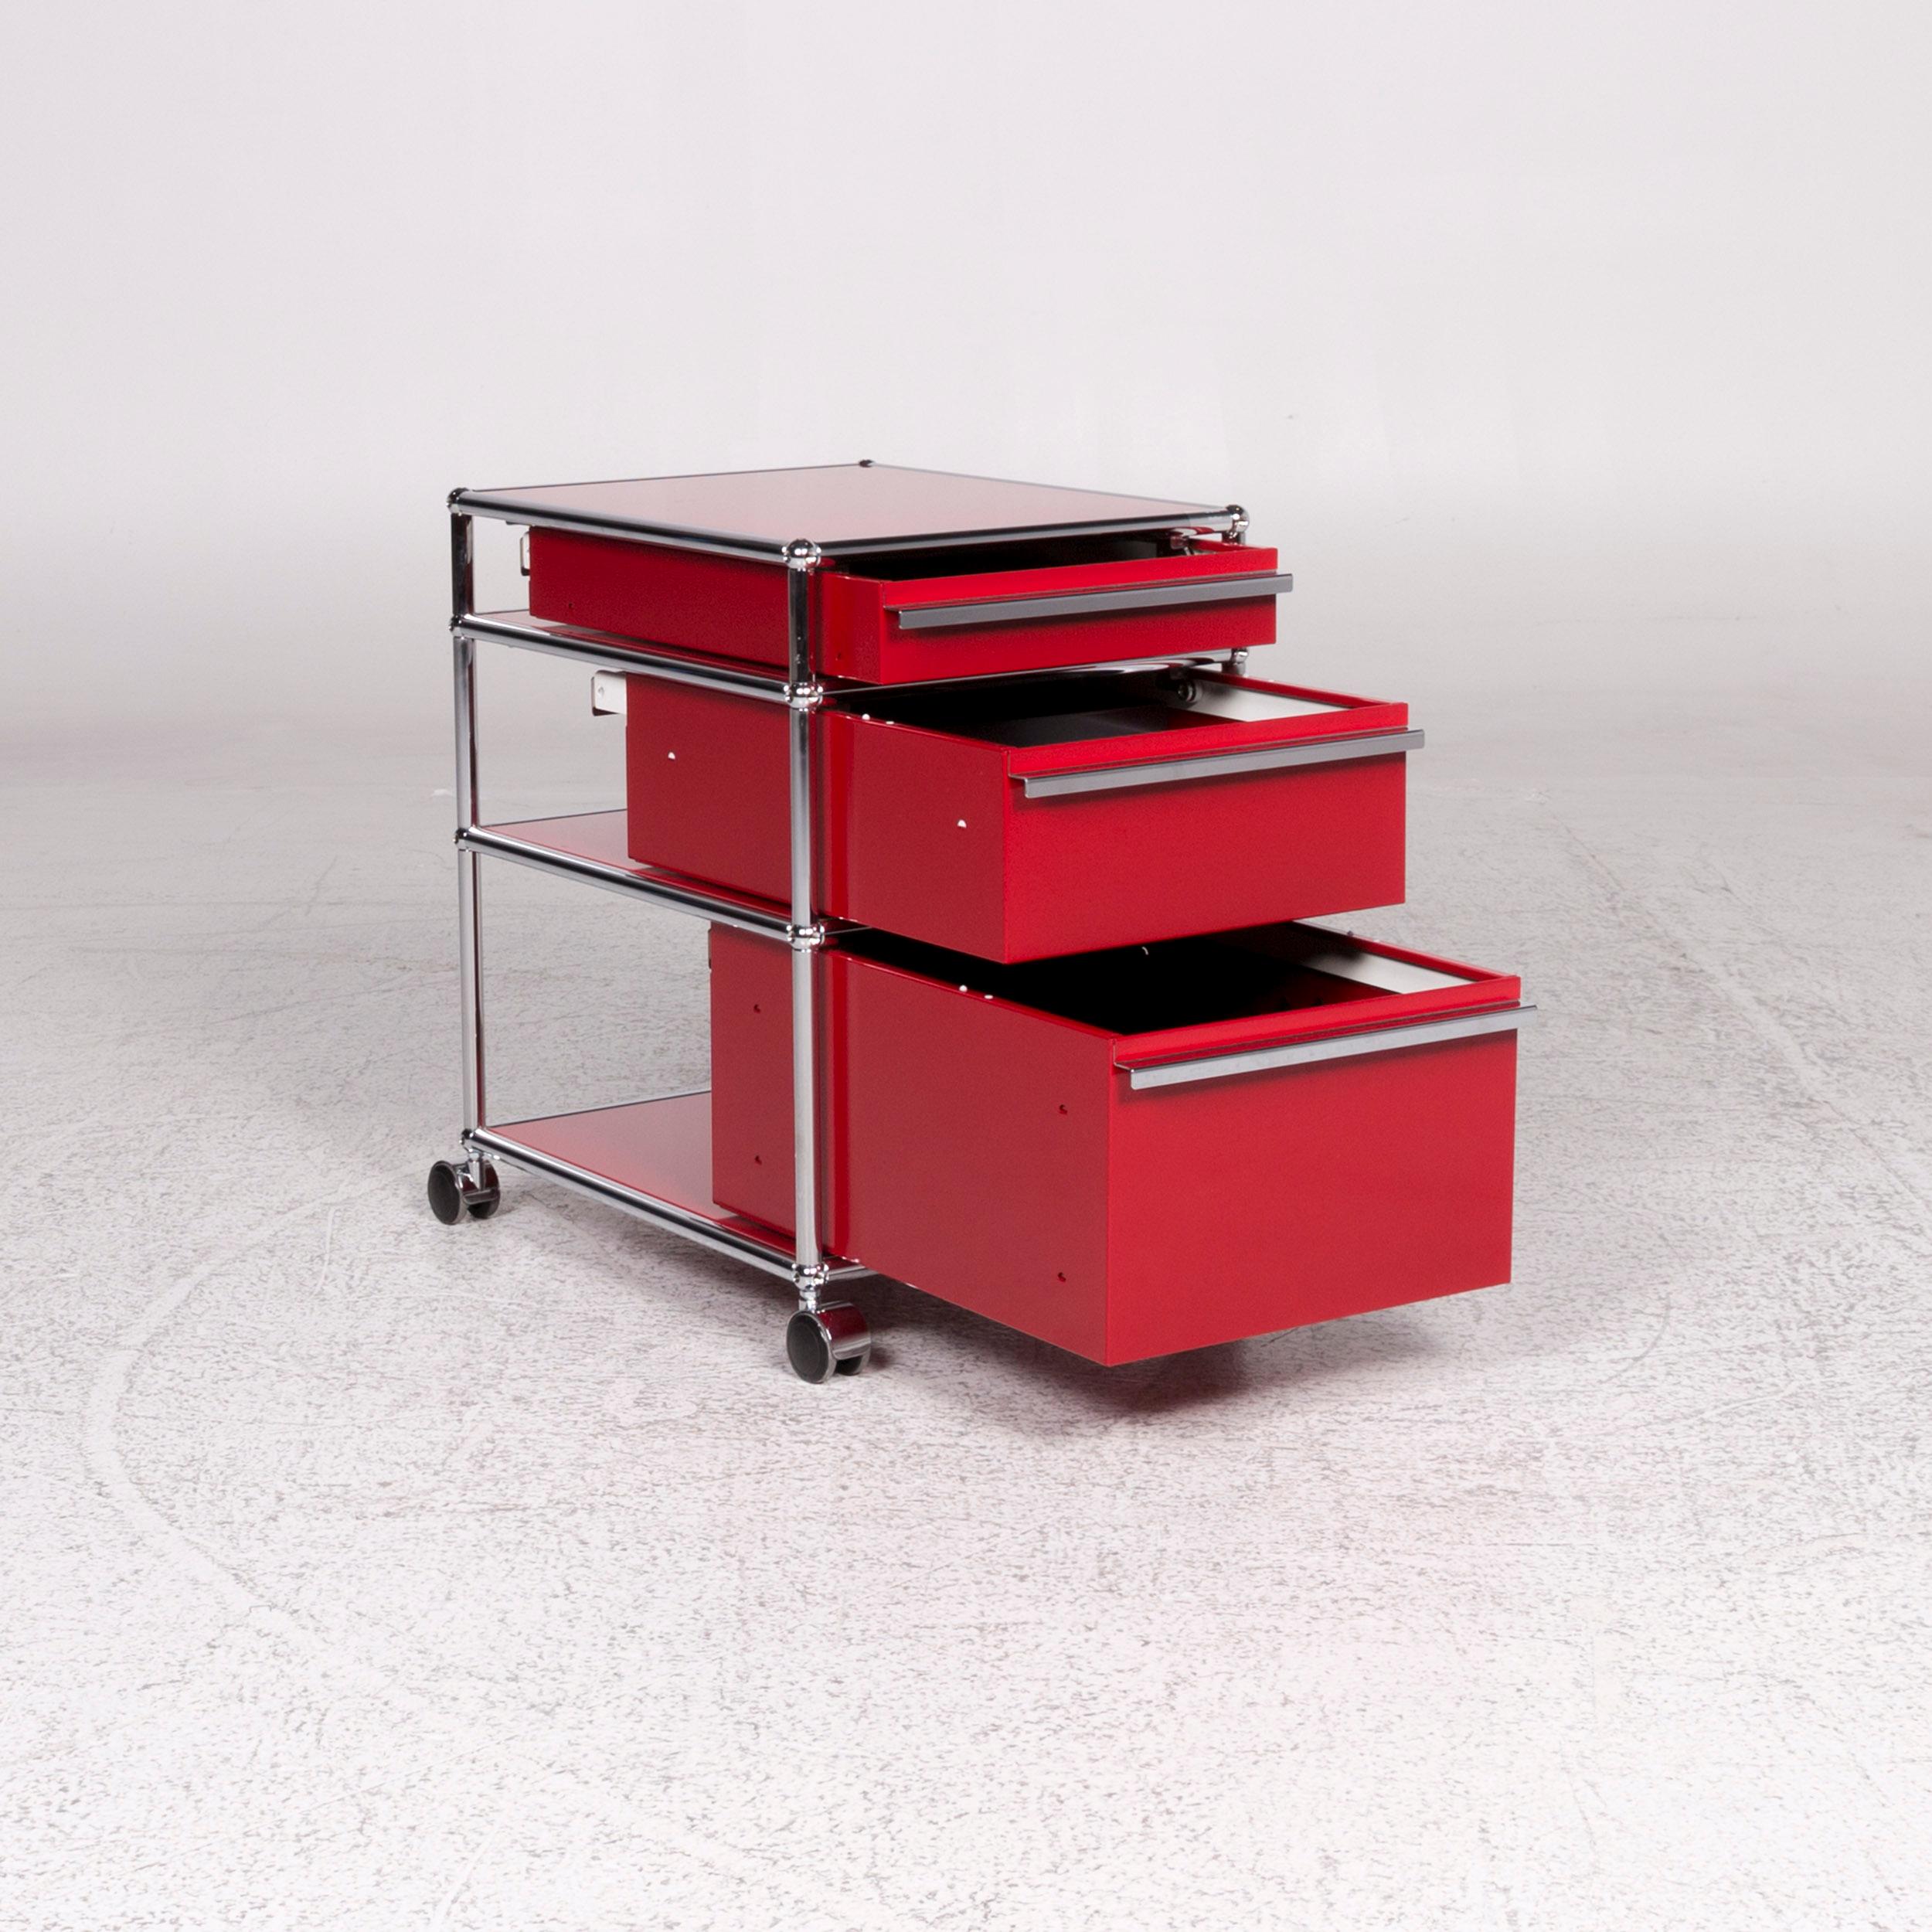 We bring to you an USM Haller metal shelf sideboard rolling containers 3 drawers red.
   
 
 Product measurements in centimeters:
 
Depth 63
Width 42
Height 63.





     